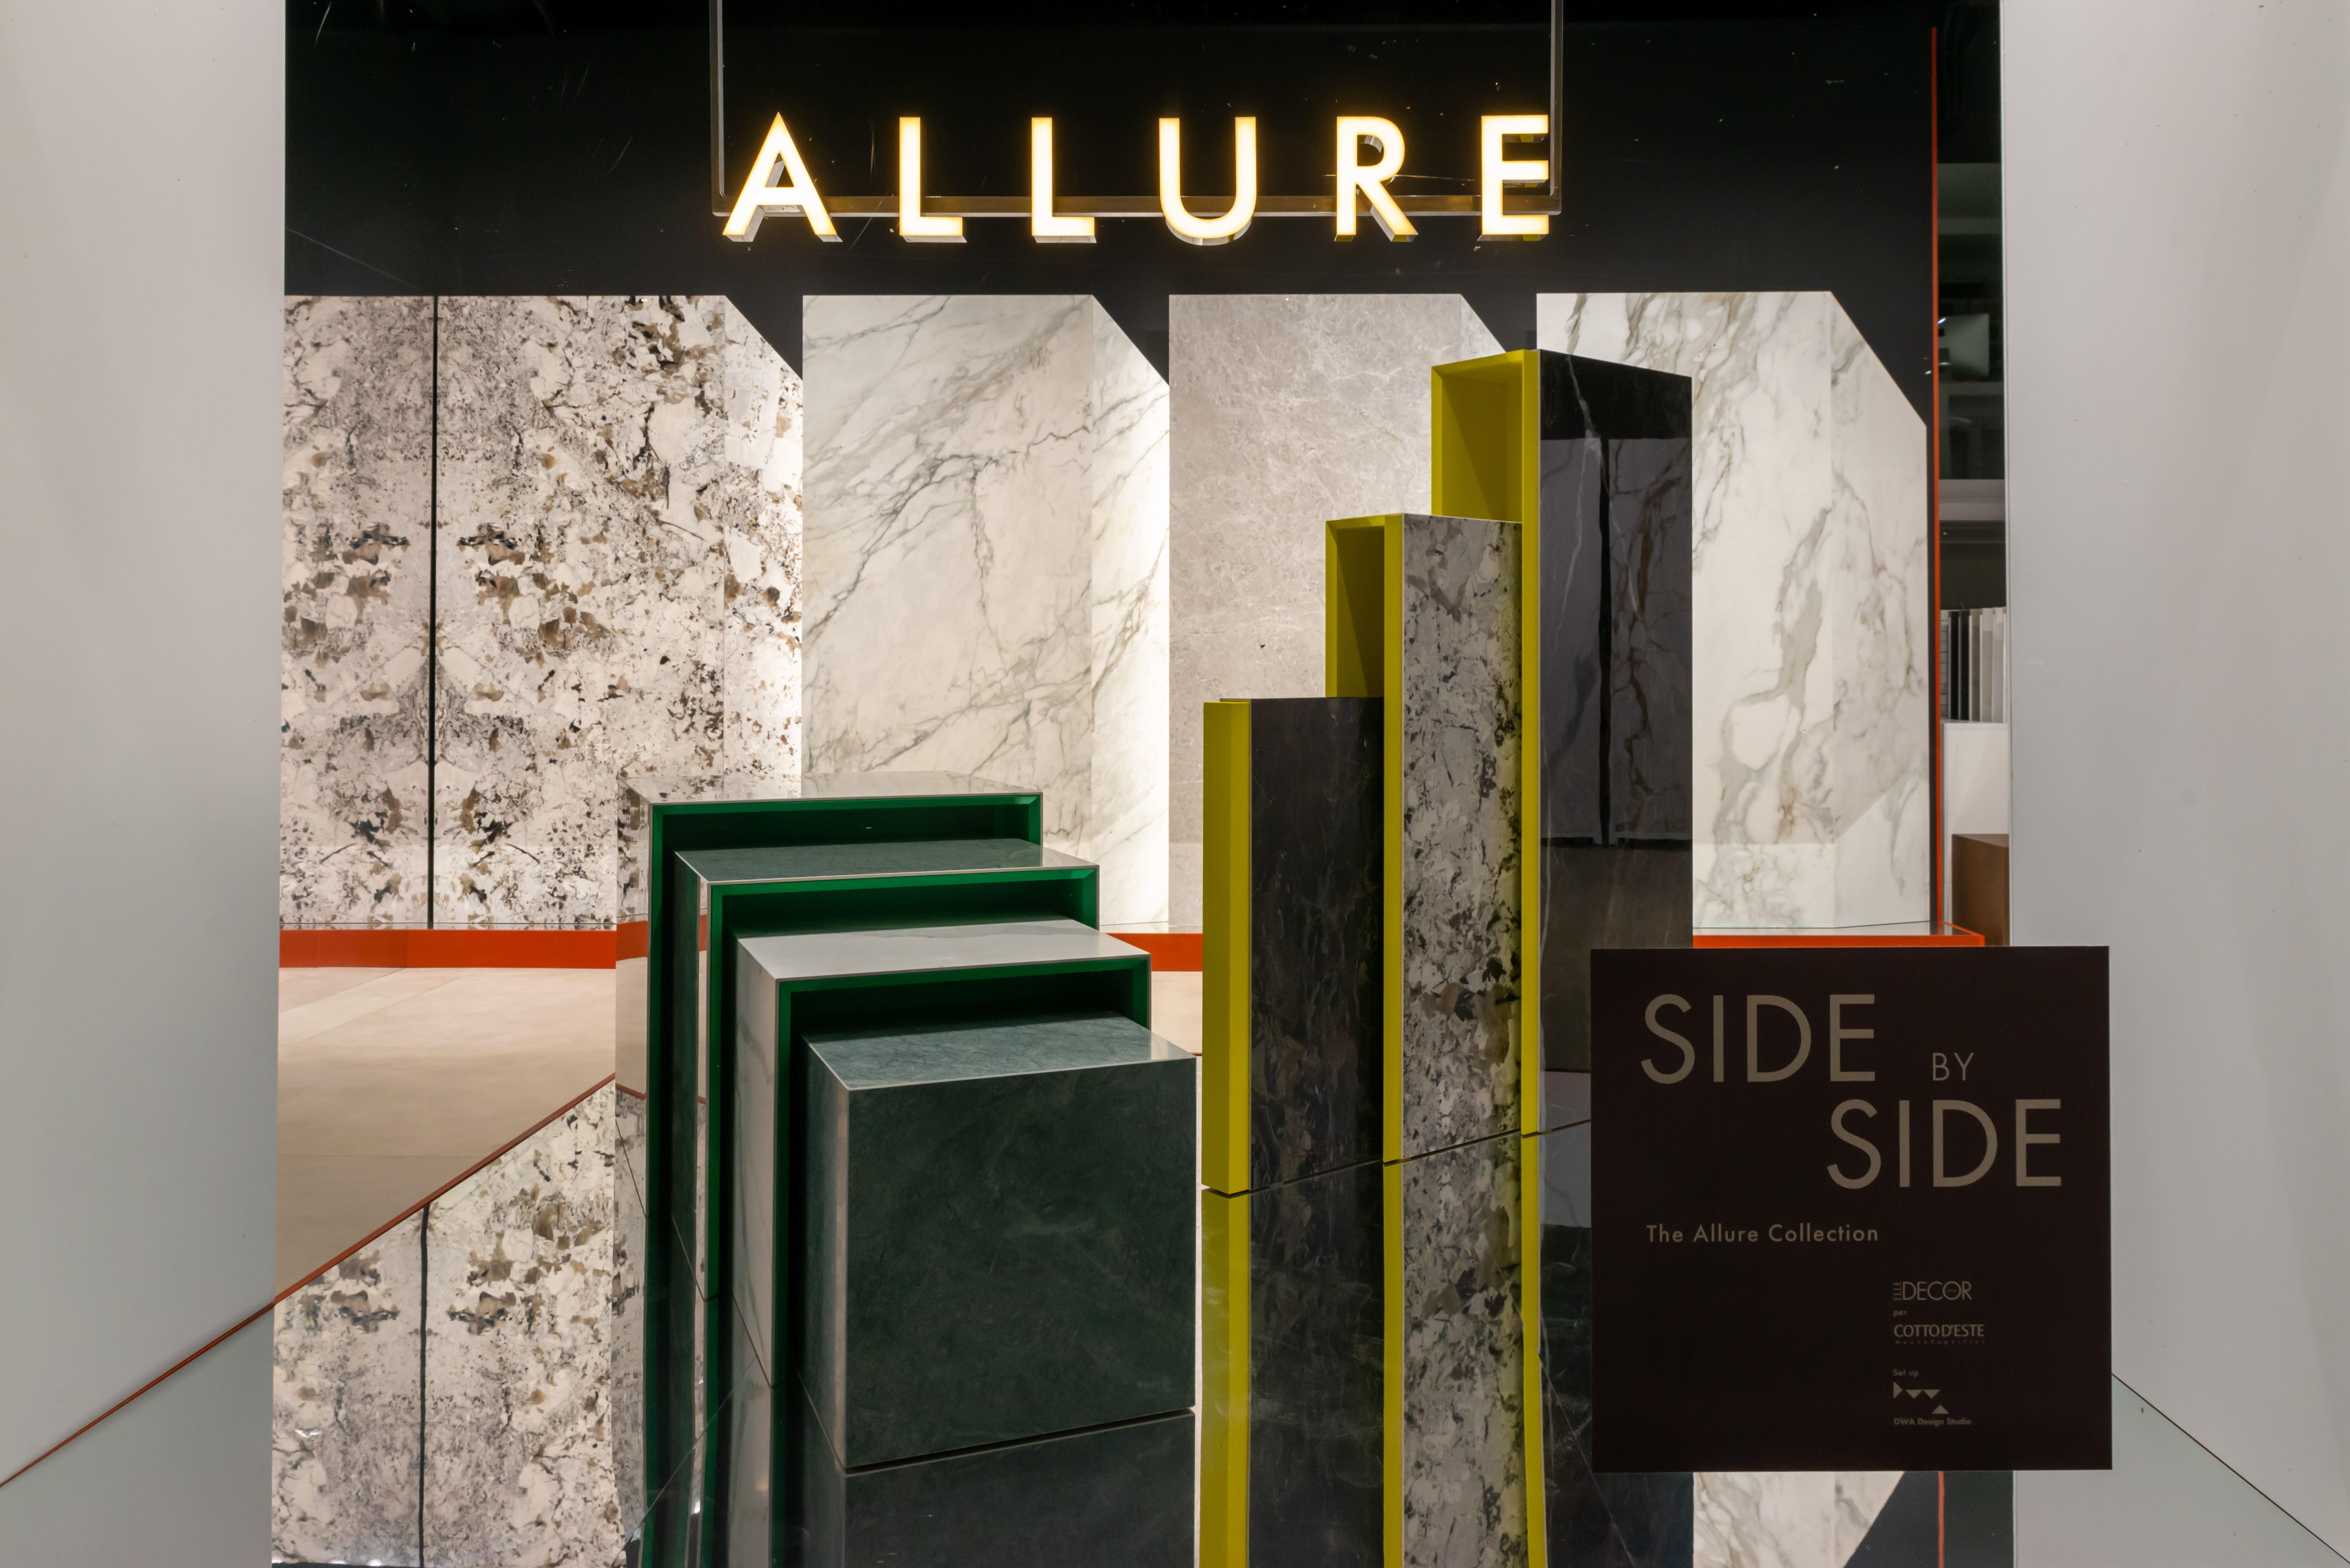 Side by side: the Allure collection: Foto 7